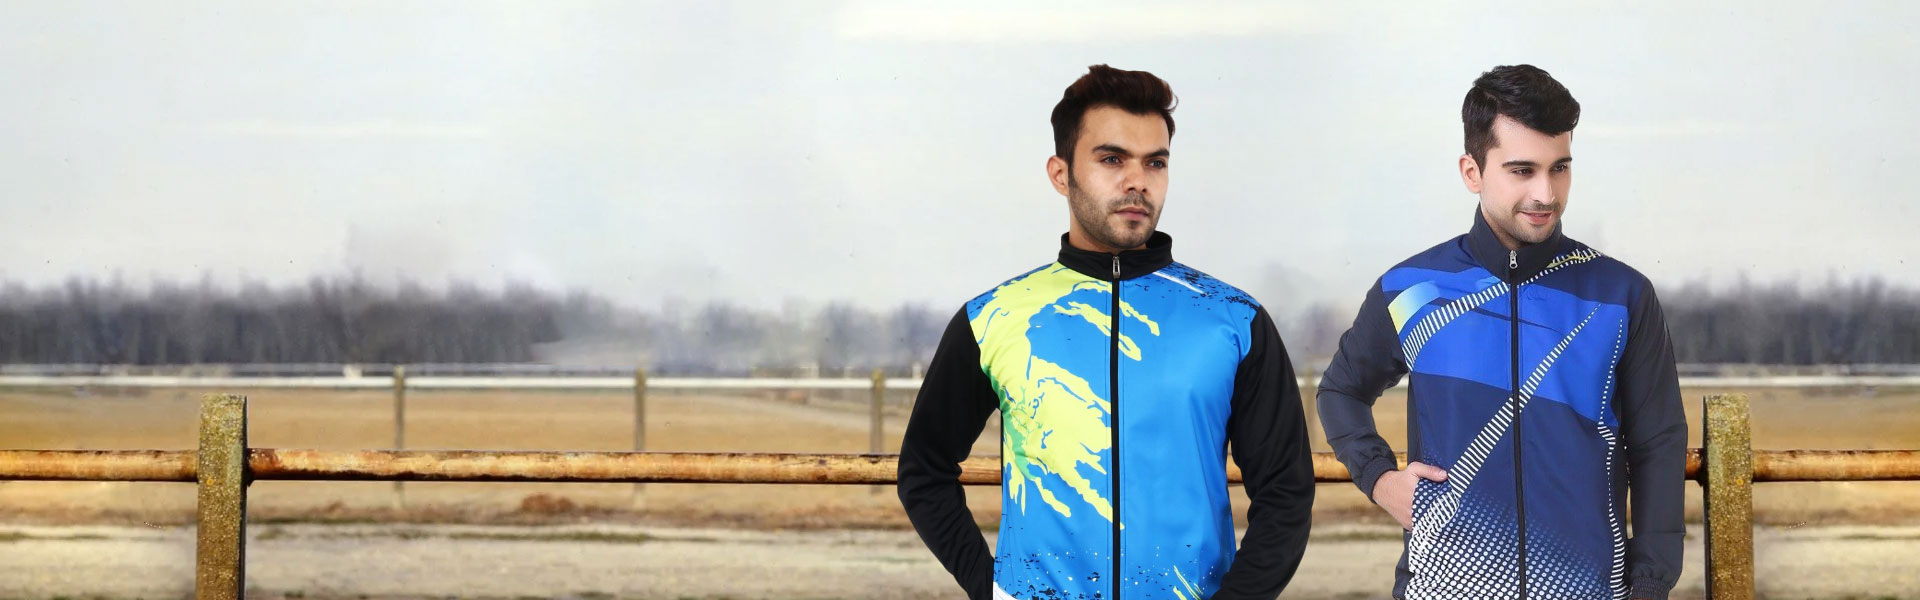 Sublimation TrackSuits Manufacturers in Valence